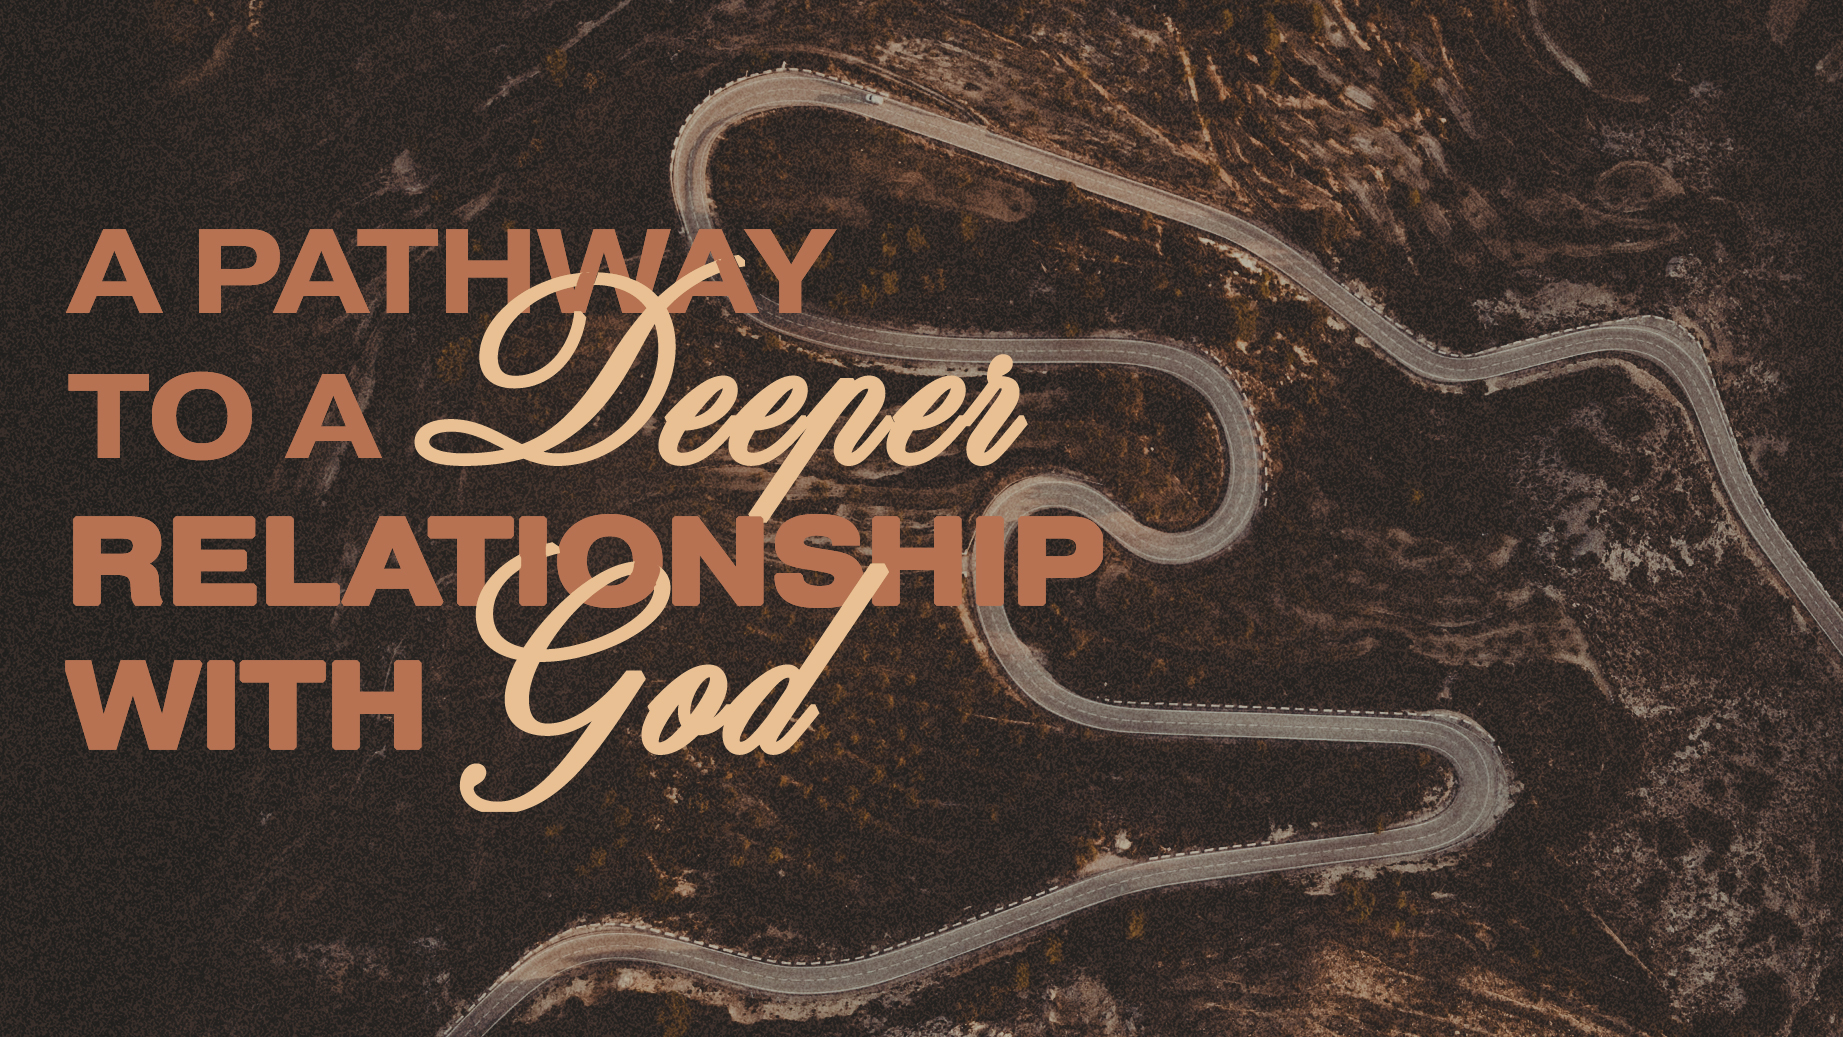 A Pathway To A Deeper Relationship With God